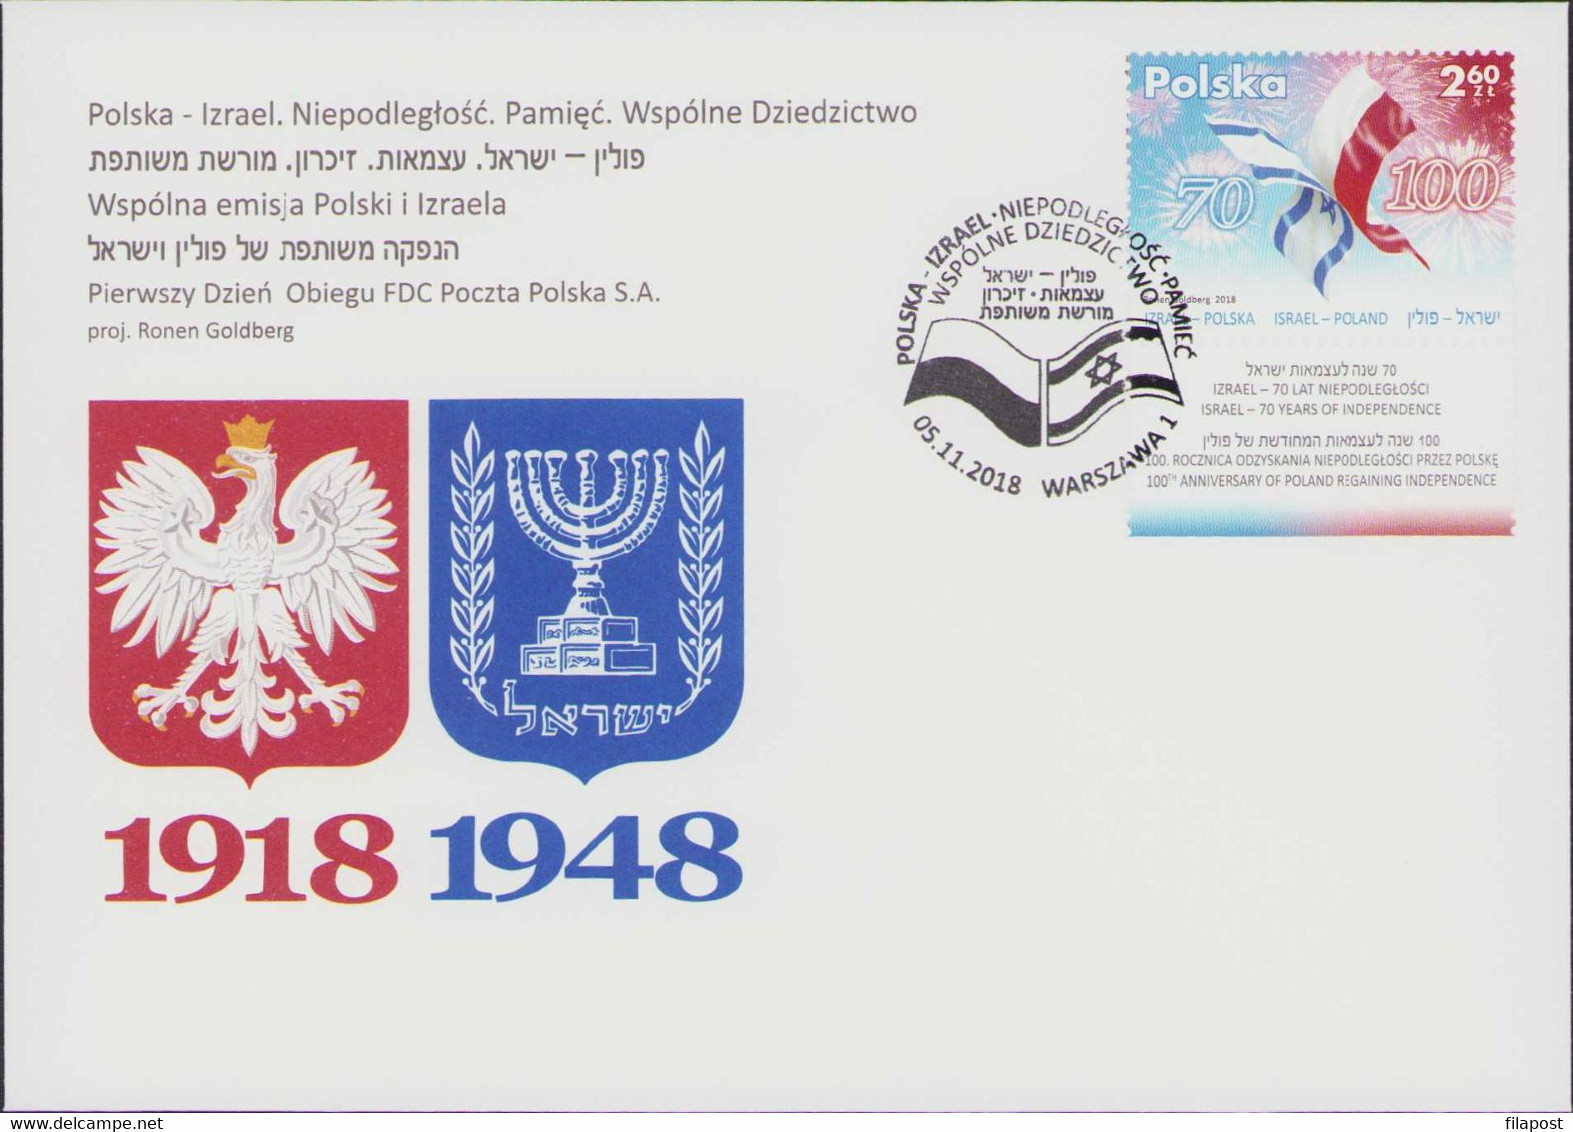 2018 Poland - Israel Joint Issue Booklet Mi 5034 Flag Independence / Memory Common Heritage, FDC + 2 Stamps MNH** FV - Cuadernillos